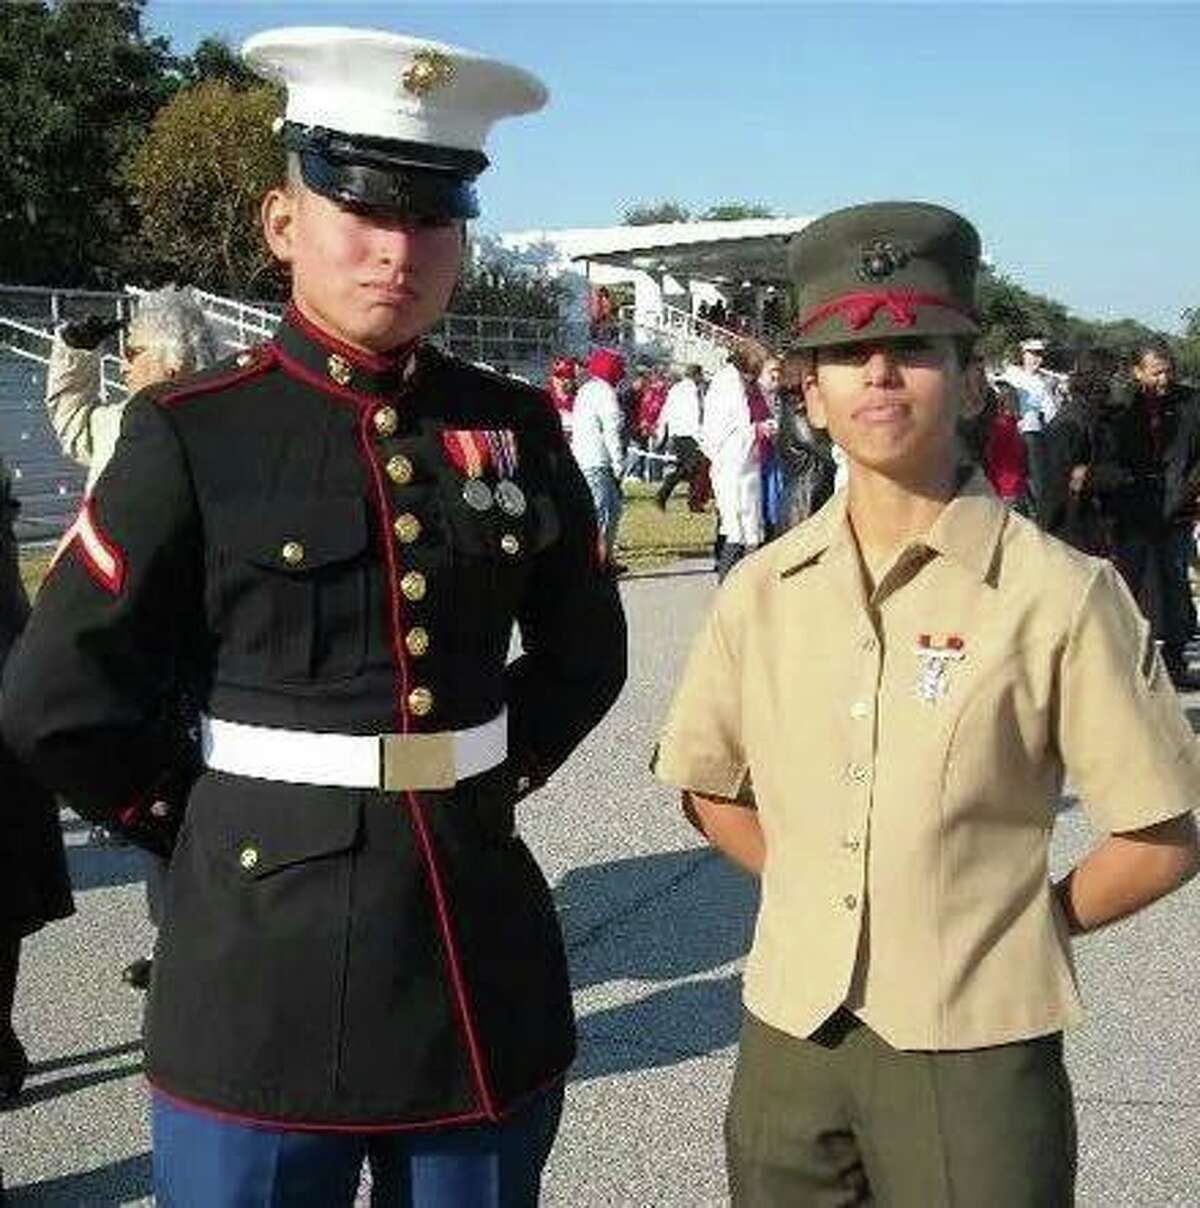 29-year-old Marine Enrico Rojo was on his way to Los Angeles International Airport with his fiancee when they came upon a crash. Rojo was struck and killed while stopping to assist a suspected drunken driver in Loma Linda early Monday morning. Rojo is seen with his sister Krystal Revels-Rojo, also a Marine.